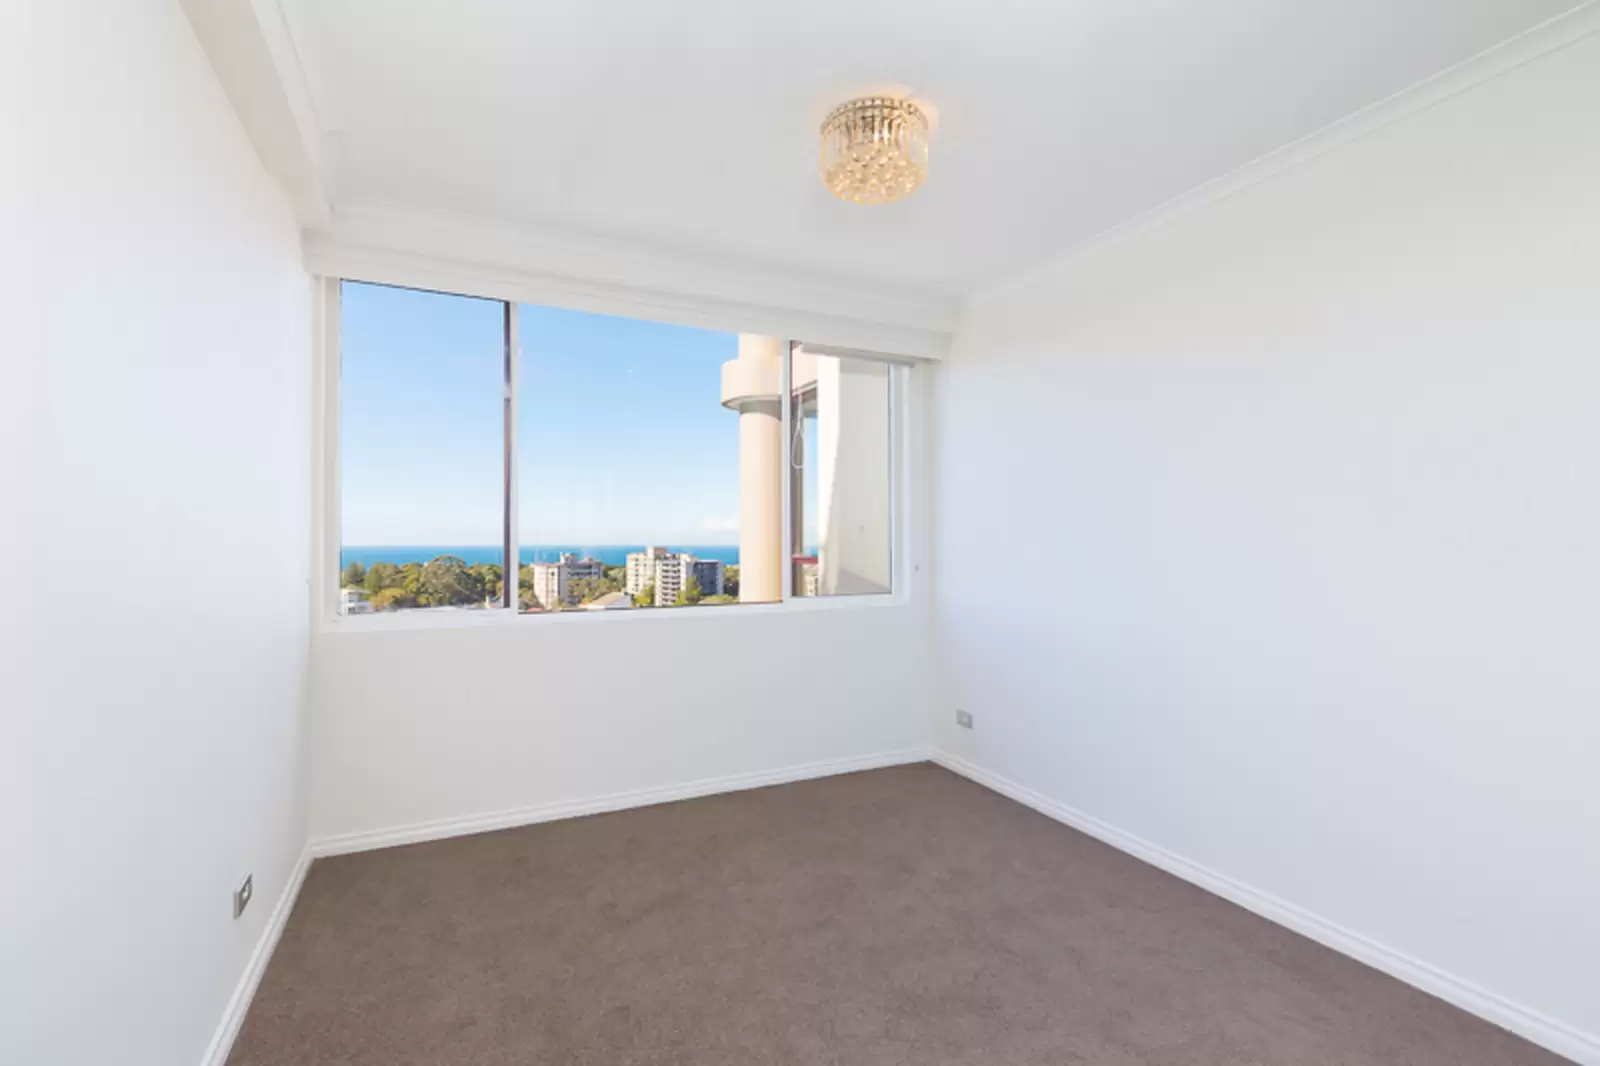 98/2A Hollywood Avenue 'The Oscar On Hollywood', Bondi Junction Leased by Sydney Sotheby's International Realty - image 14